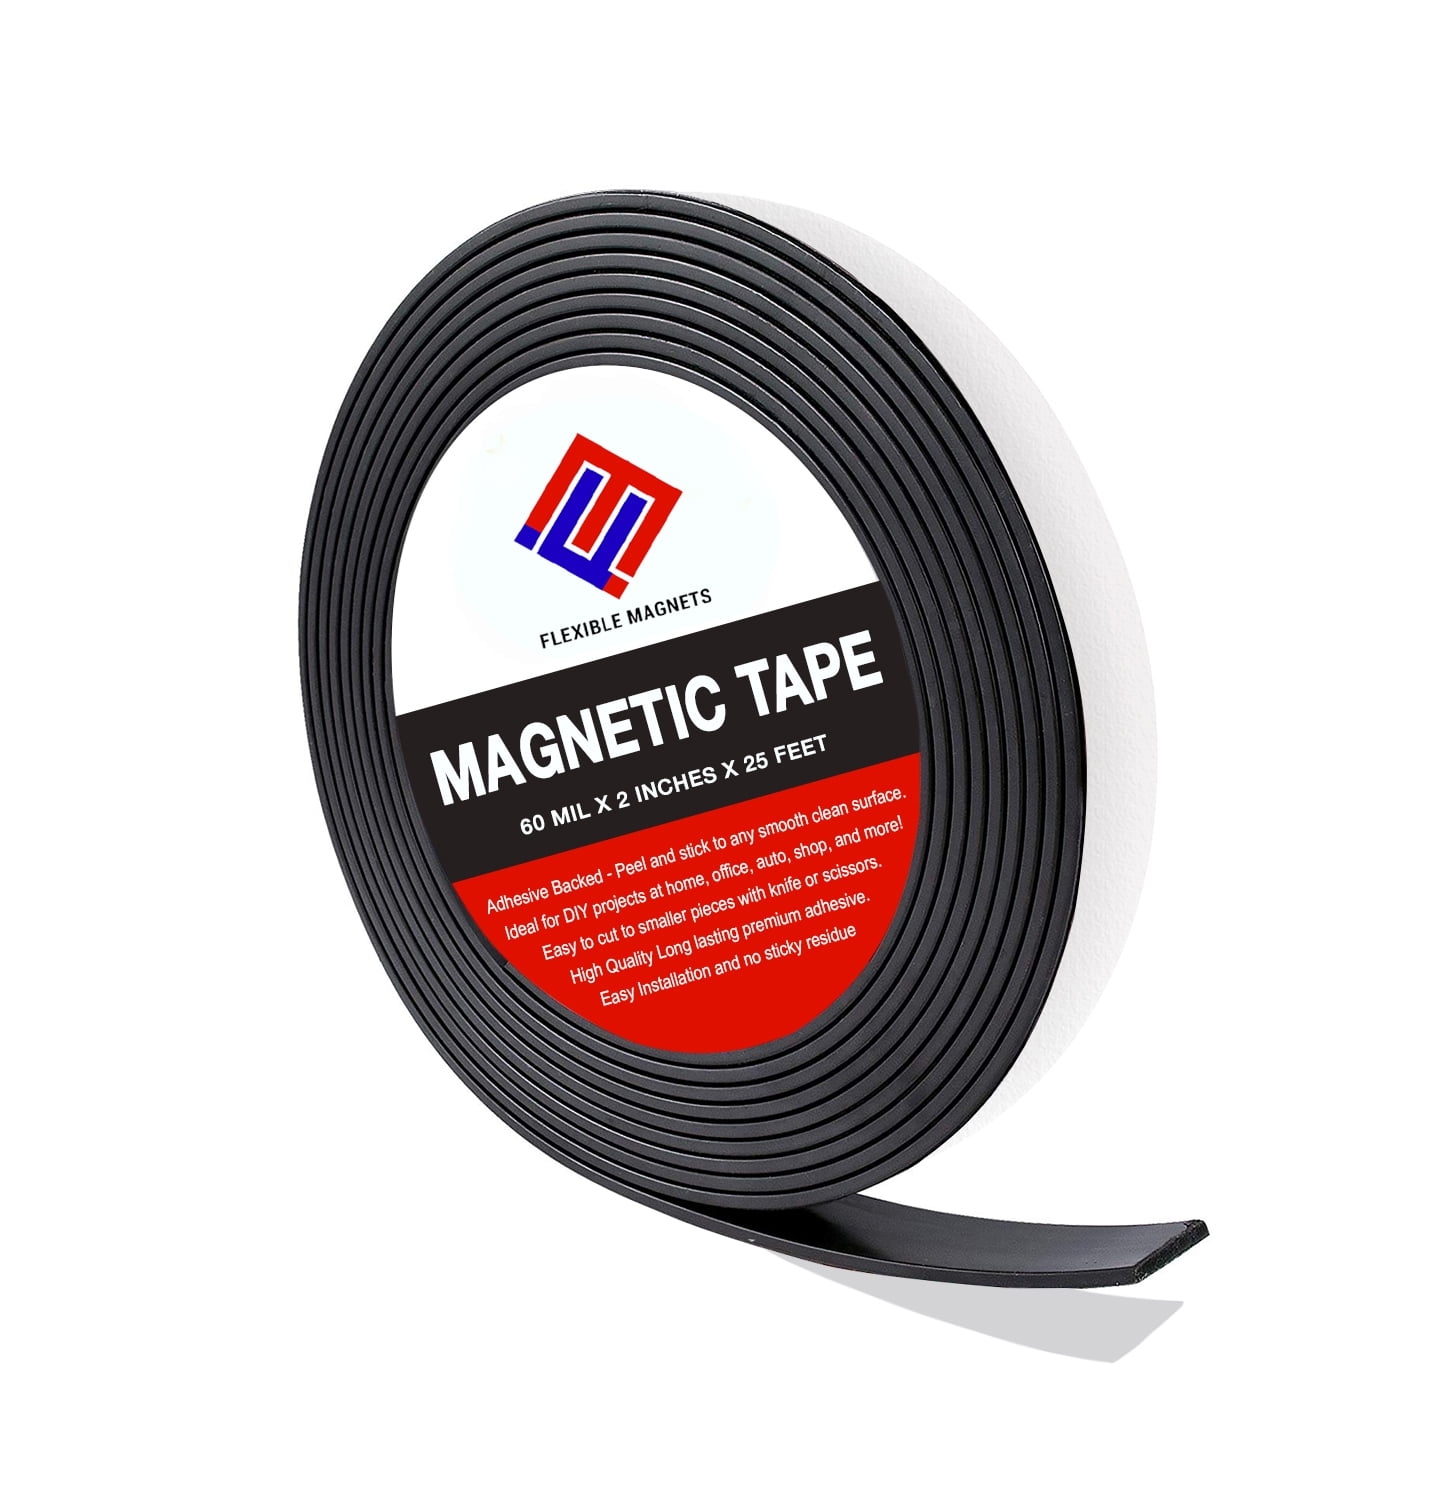 Magnetic Tape Turns 60